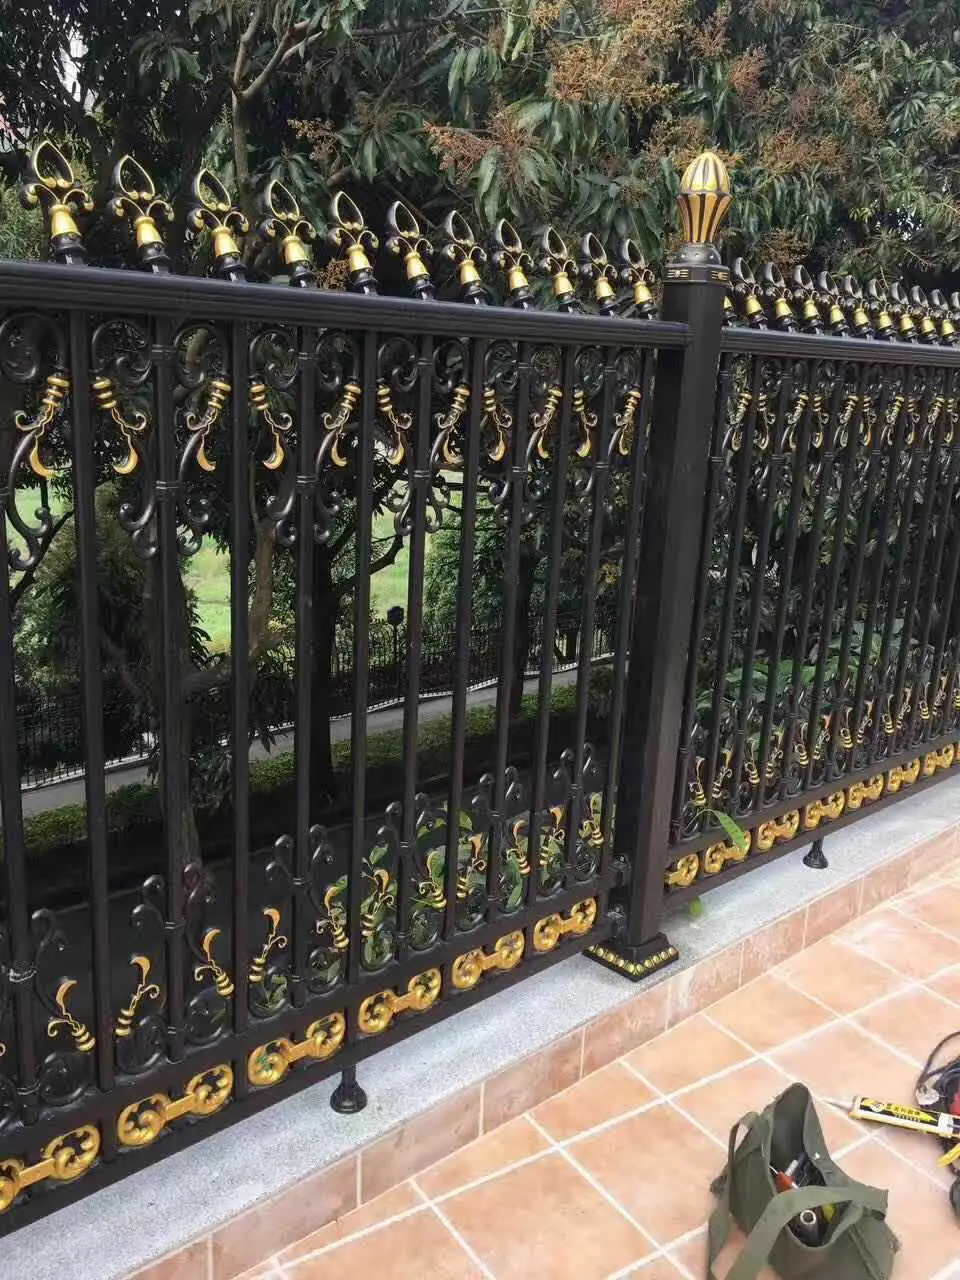 Hench Aluminium Garden Fence Panel /Wrought Iron Steel Fence /Galvanized Metal Picket Fence/Security Yard Fence